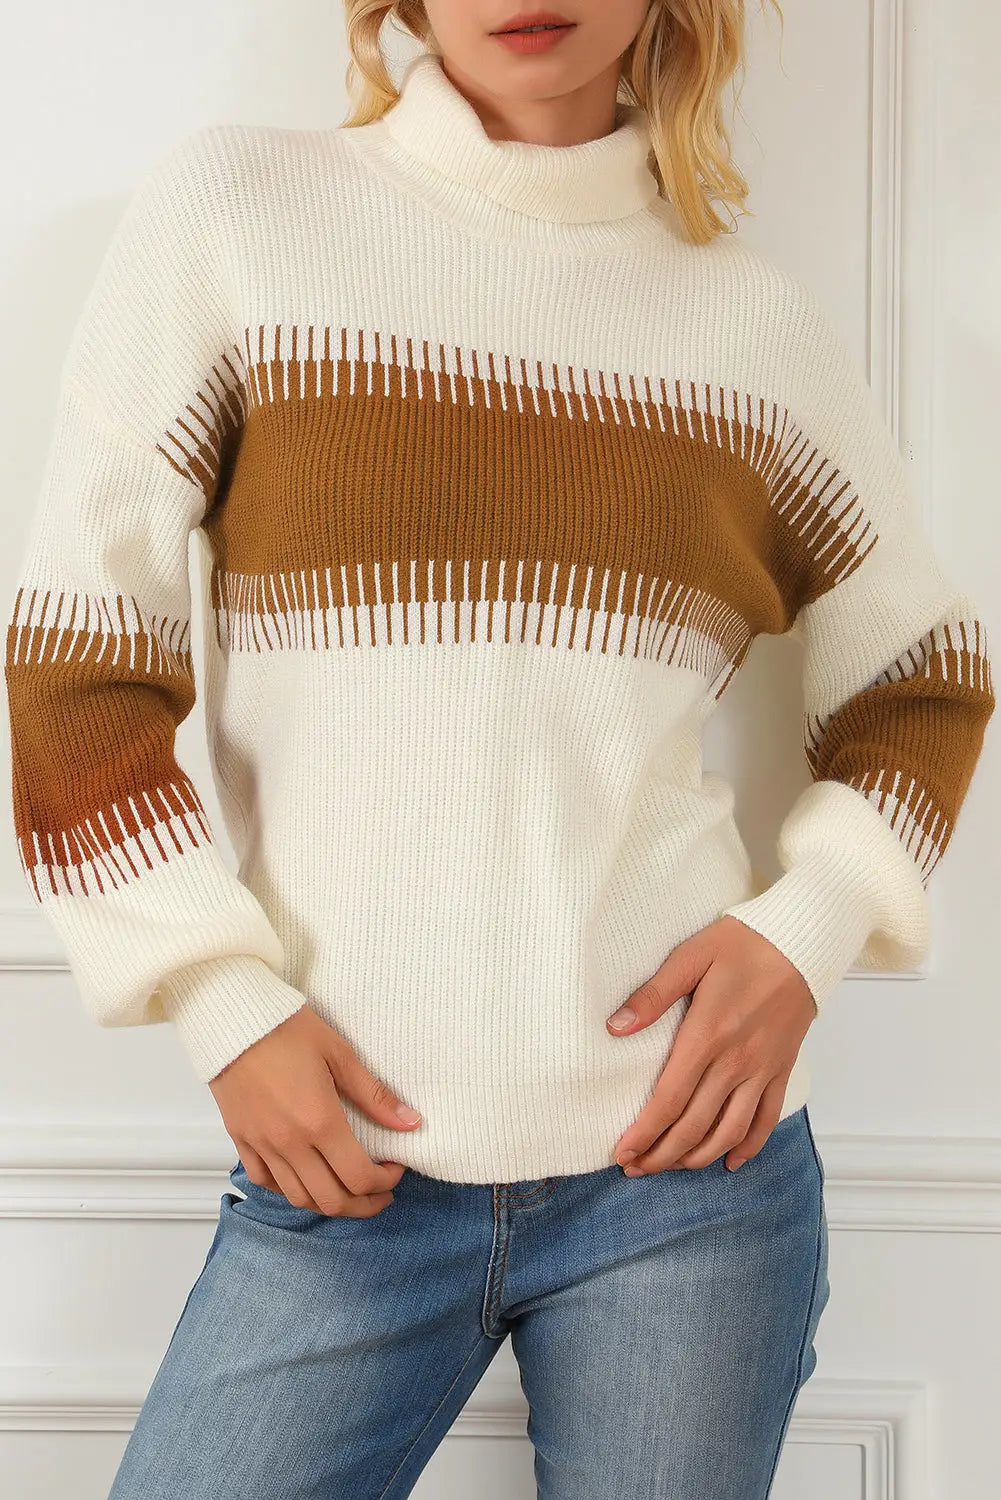 White printed patchwork turtle neck knitted sweater - s / 50% viscose + 28% polyester + 22% polyamide - sweaters &